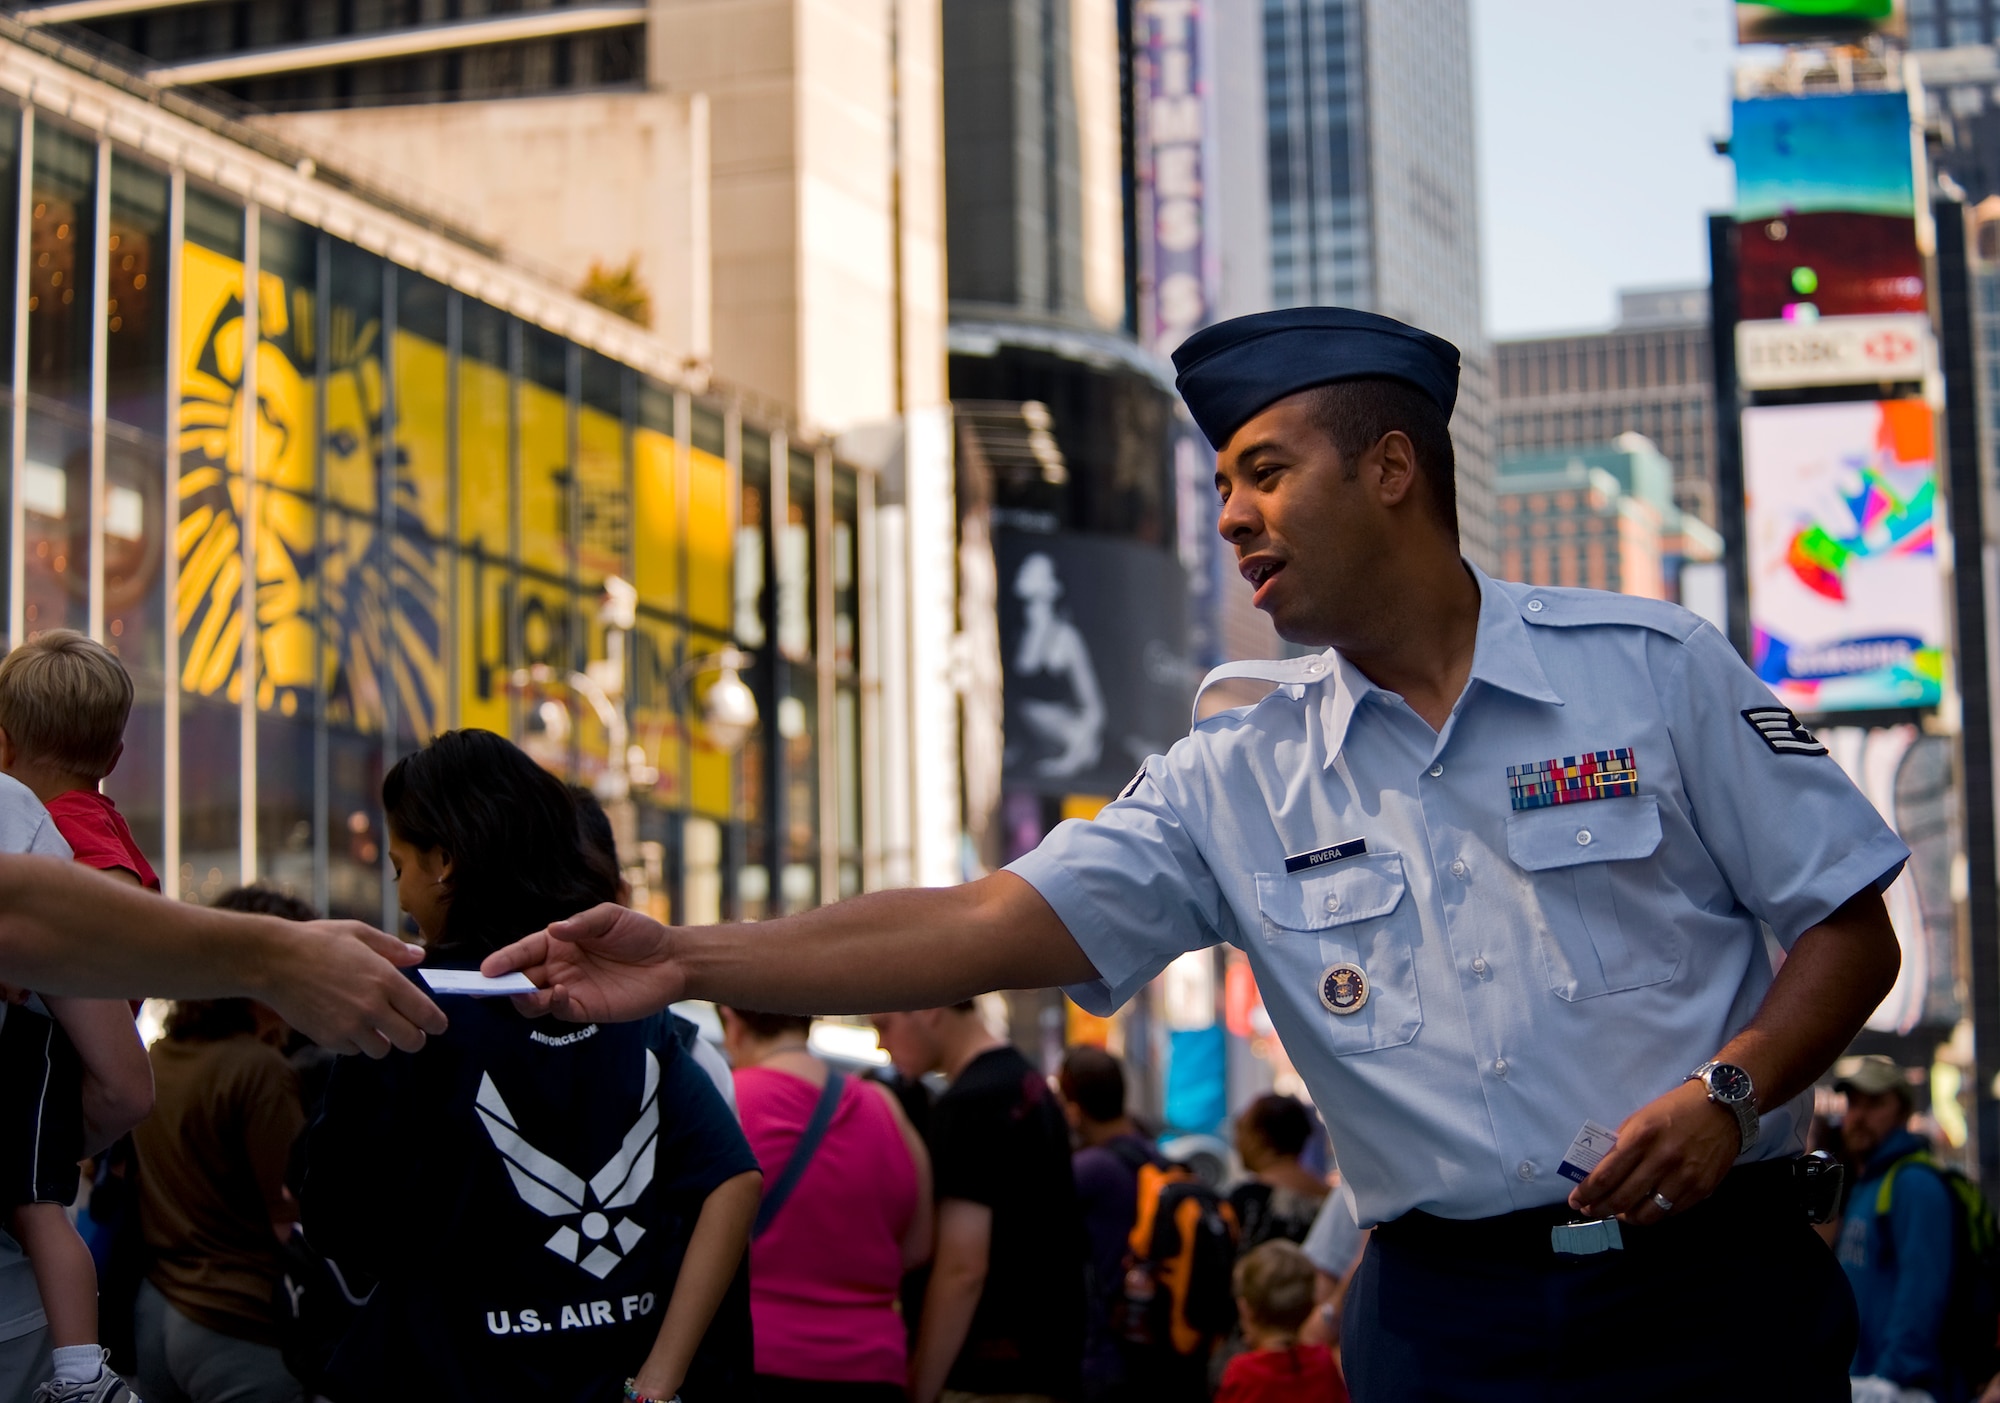 Airmen, aircraft showcased in Times Square > Air Force > Article